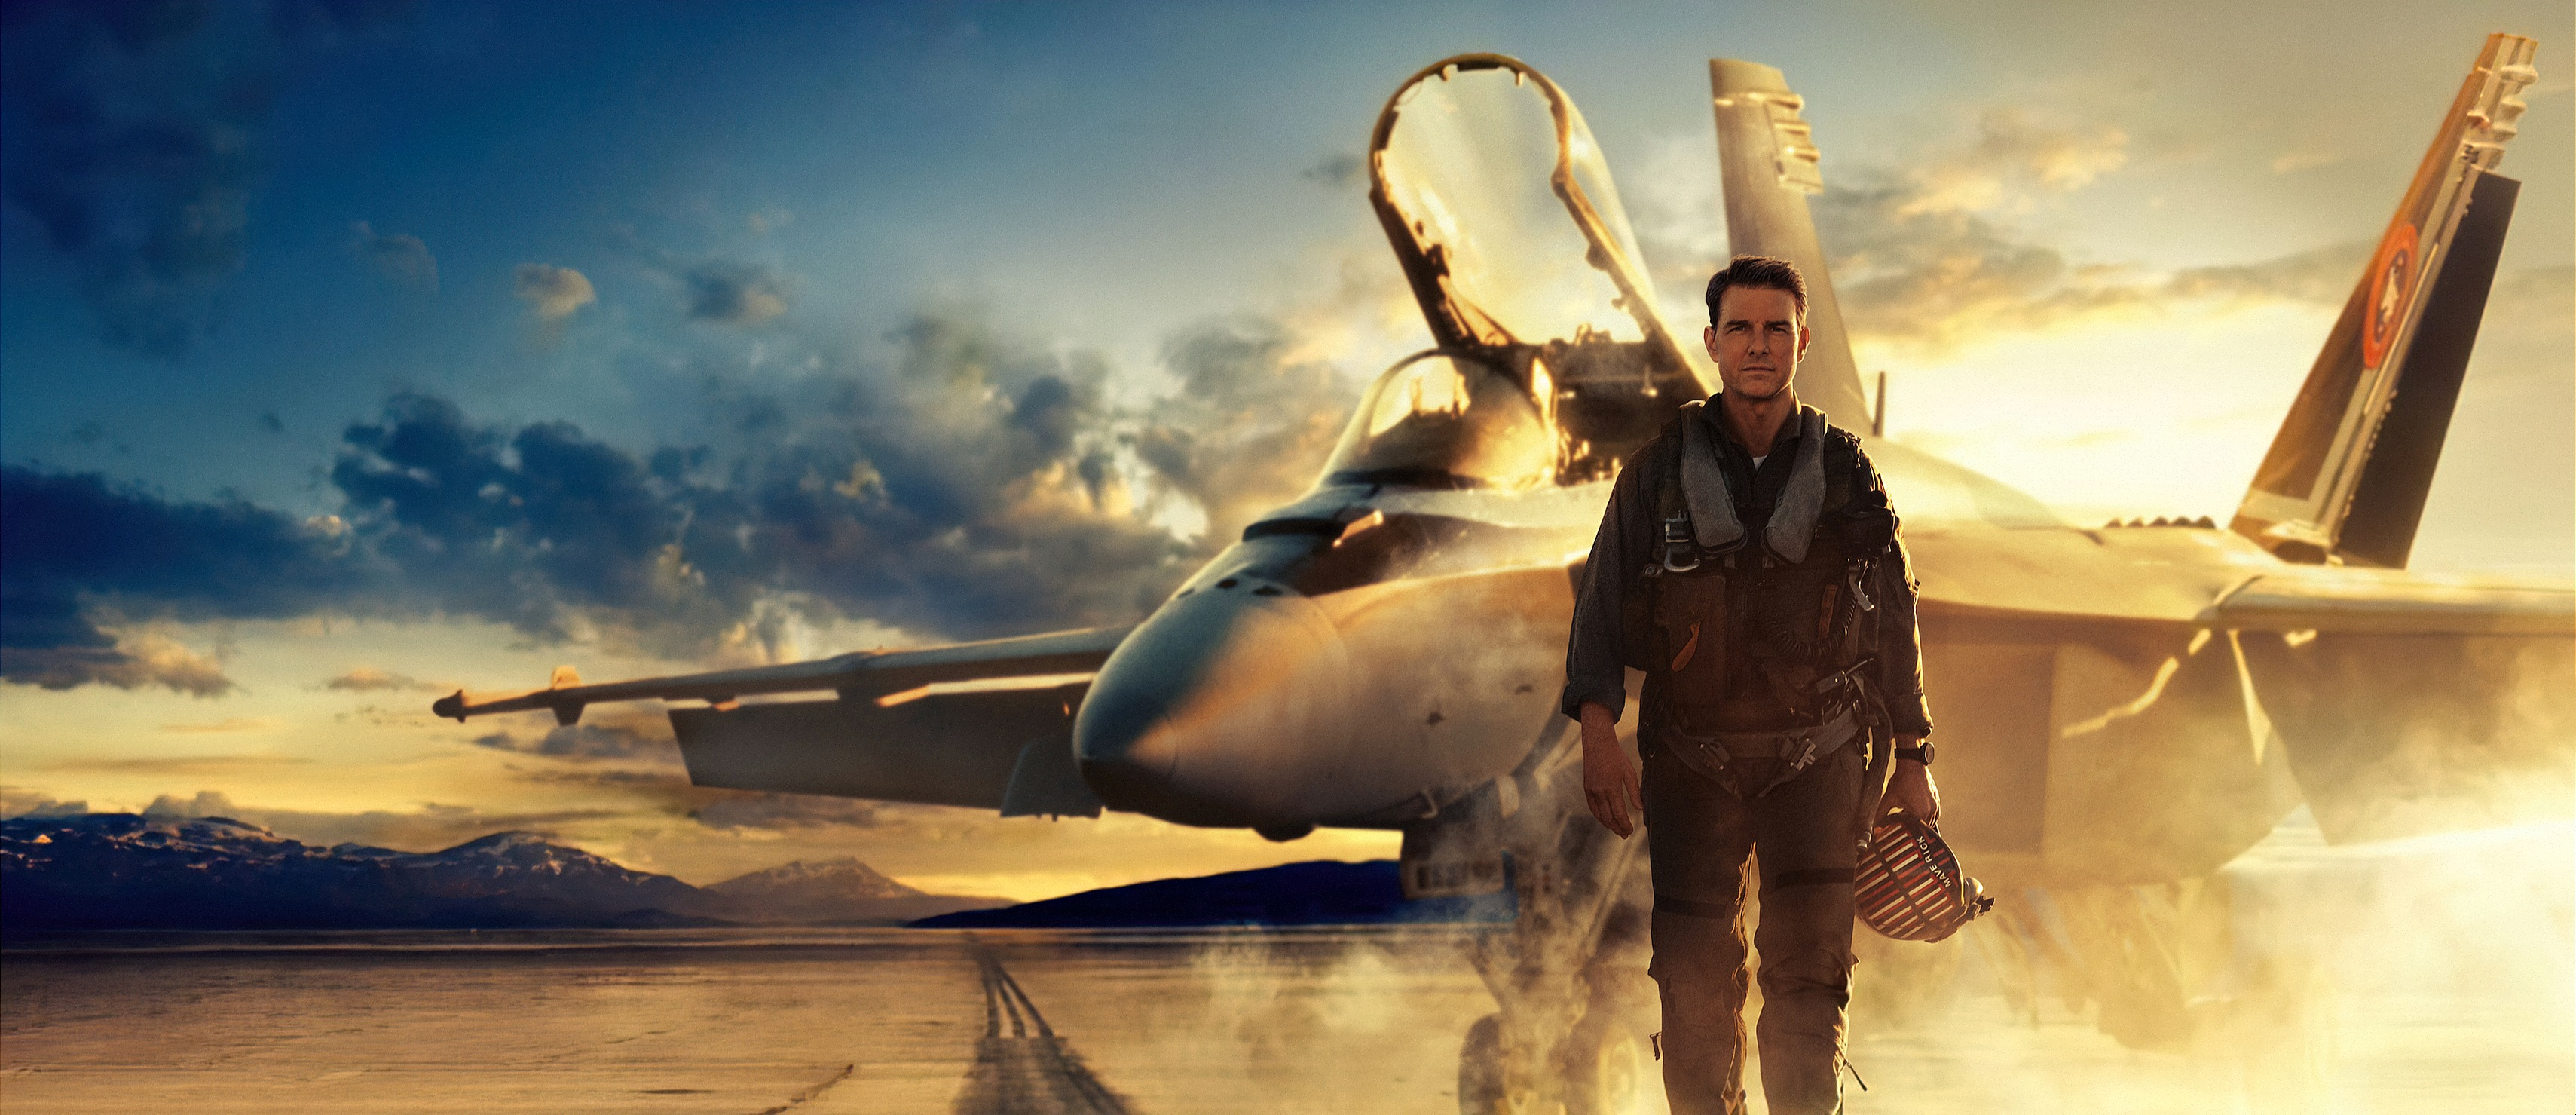 Top Gun:Maverick movie poster, with Tom Cruise in it.